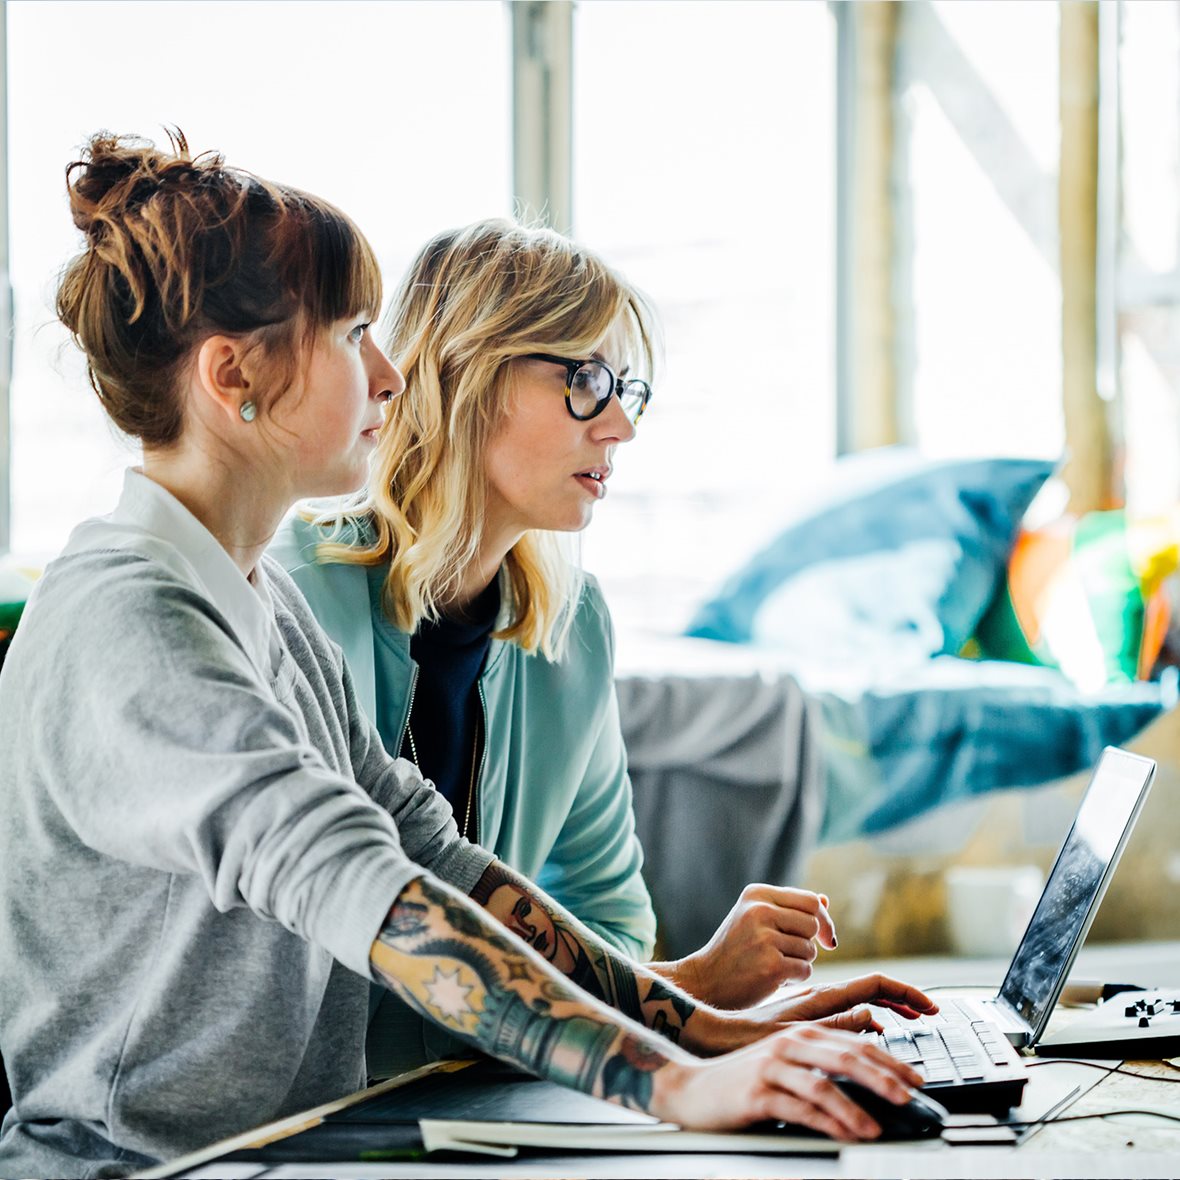 Two businesswomen working on a computer - stock photo